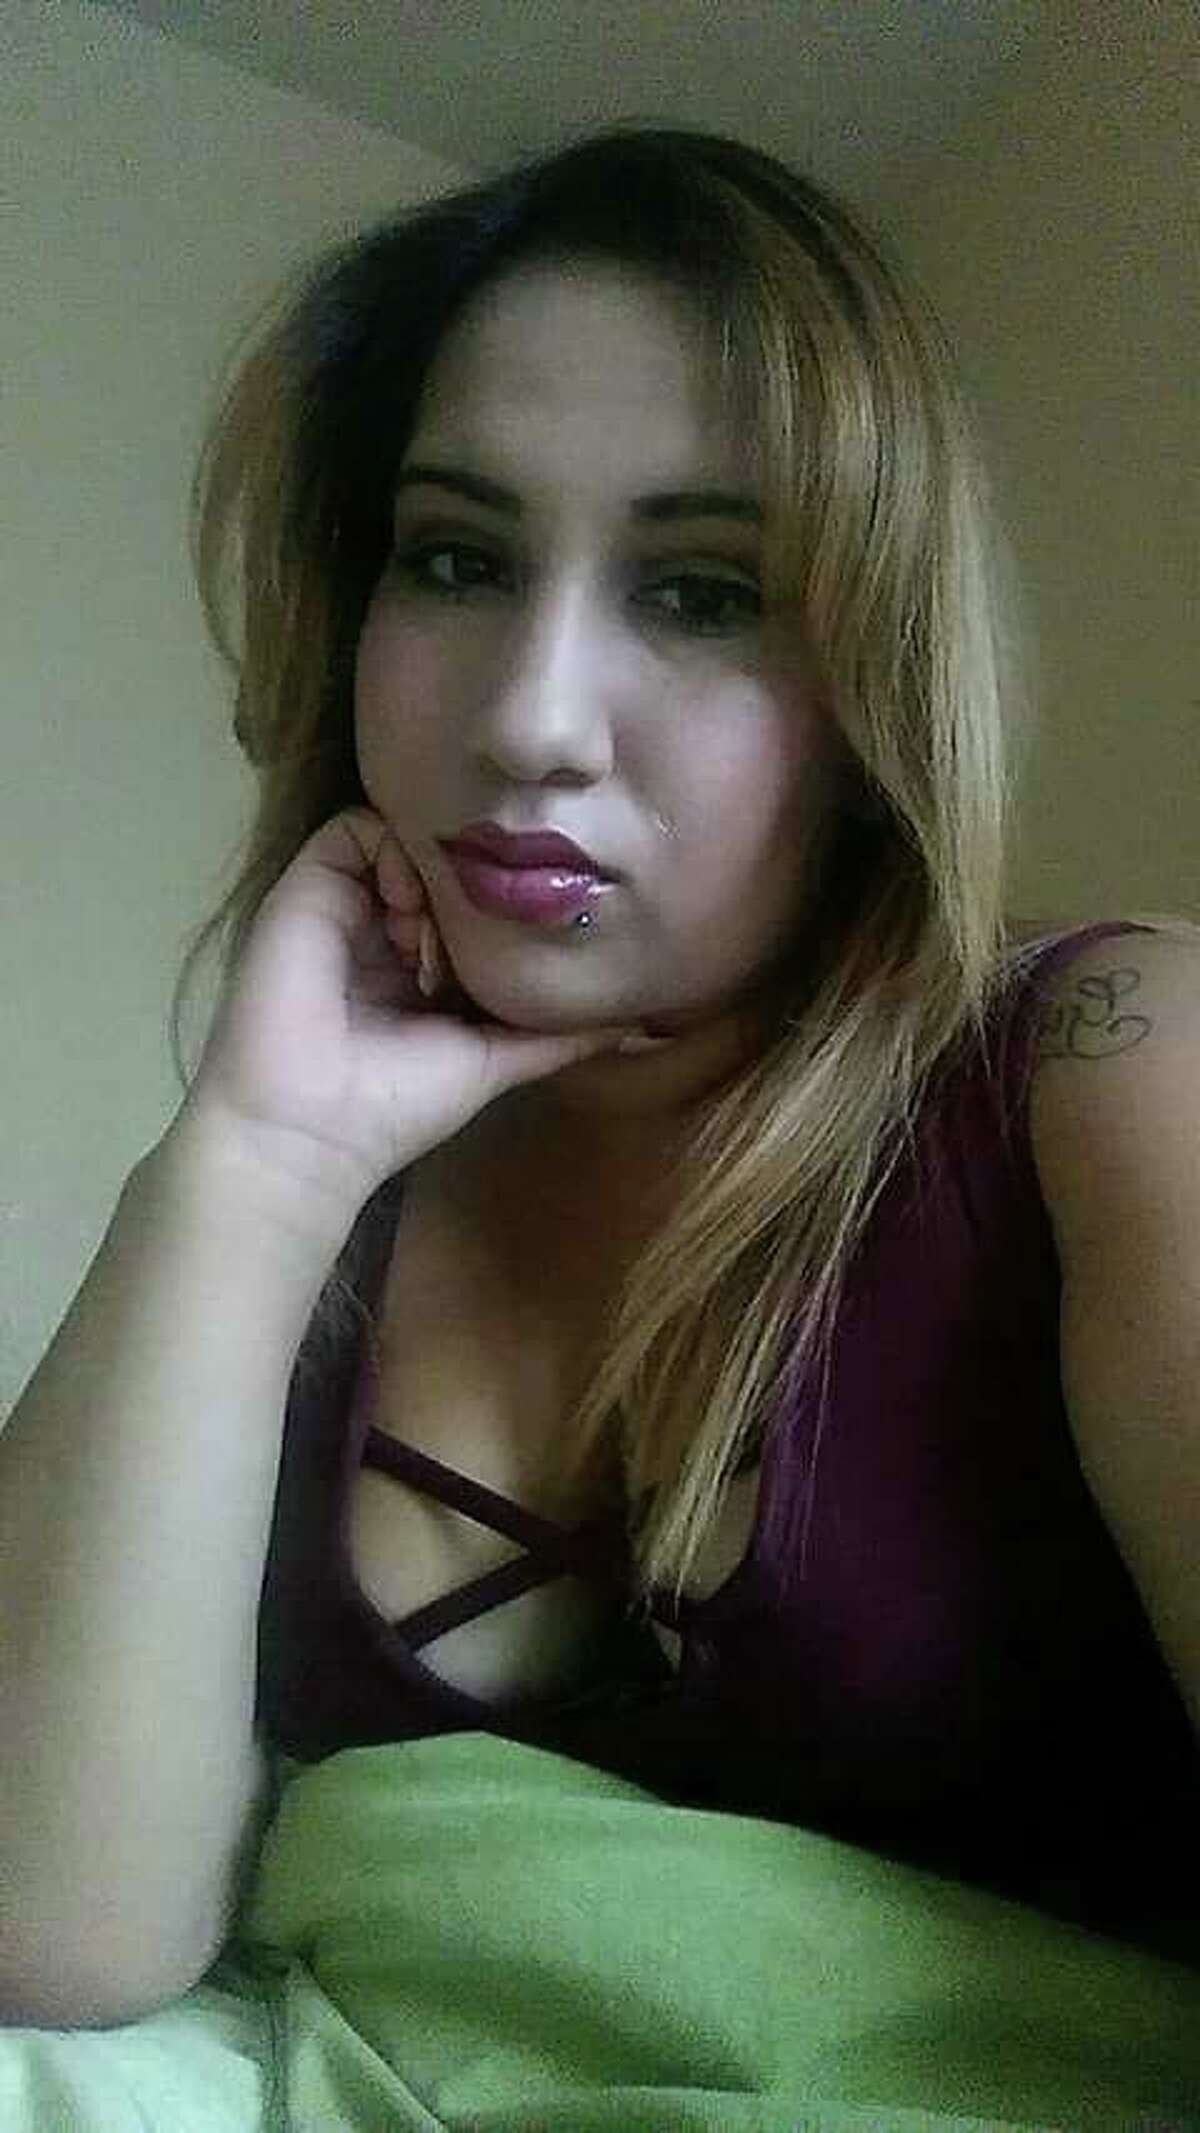 Courtney Elena Rodriguez was recently listed as a "want to locate" person. She is believed to have last been seen in Laredo on Jan. 14.